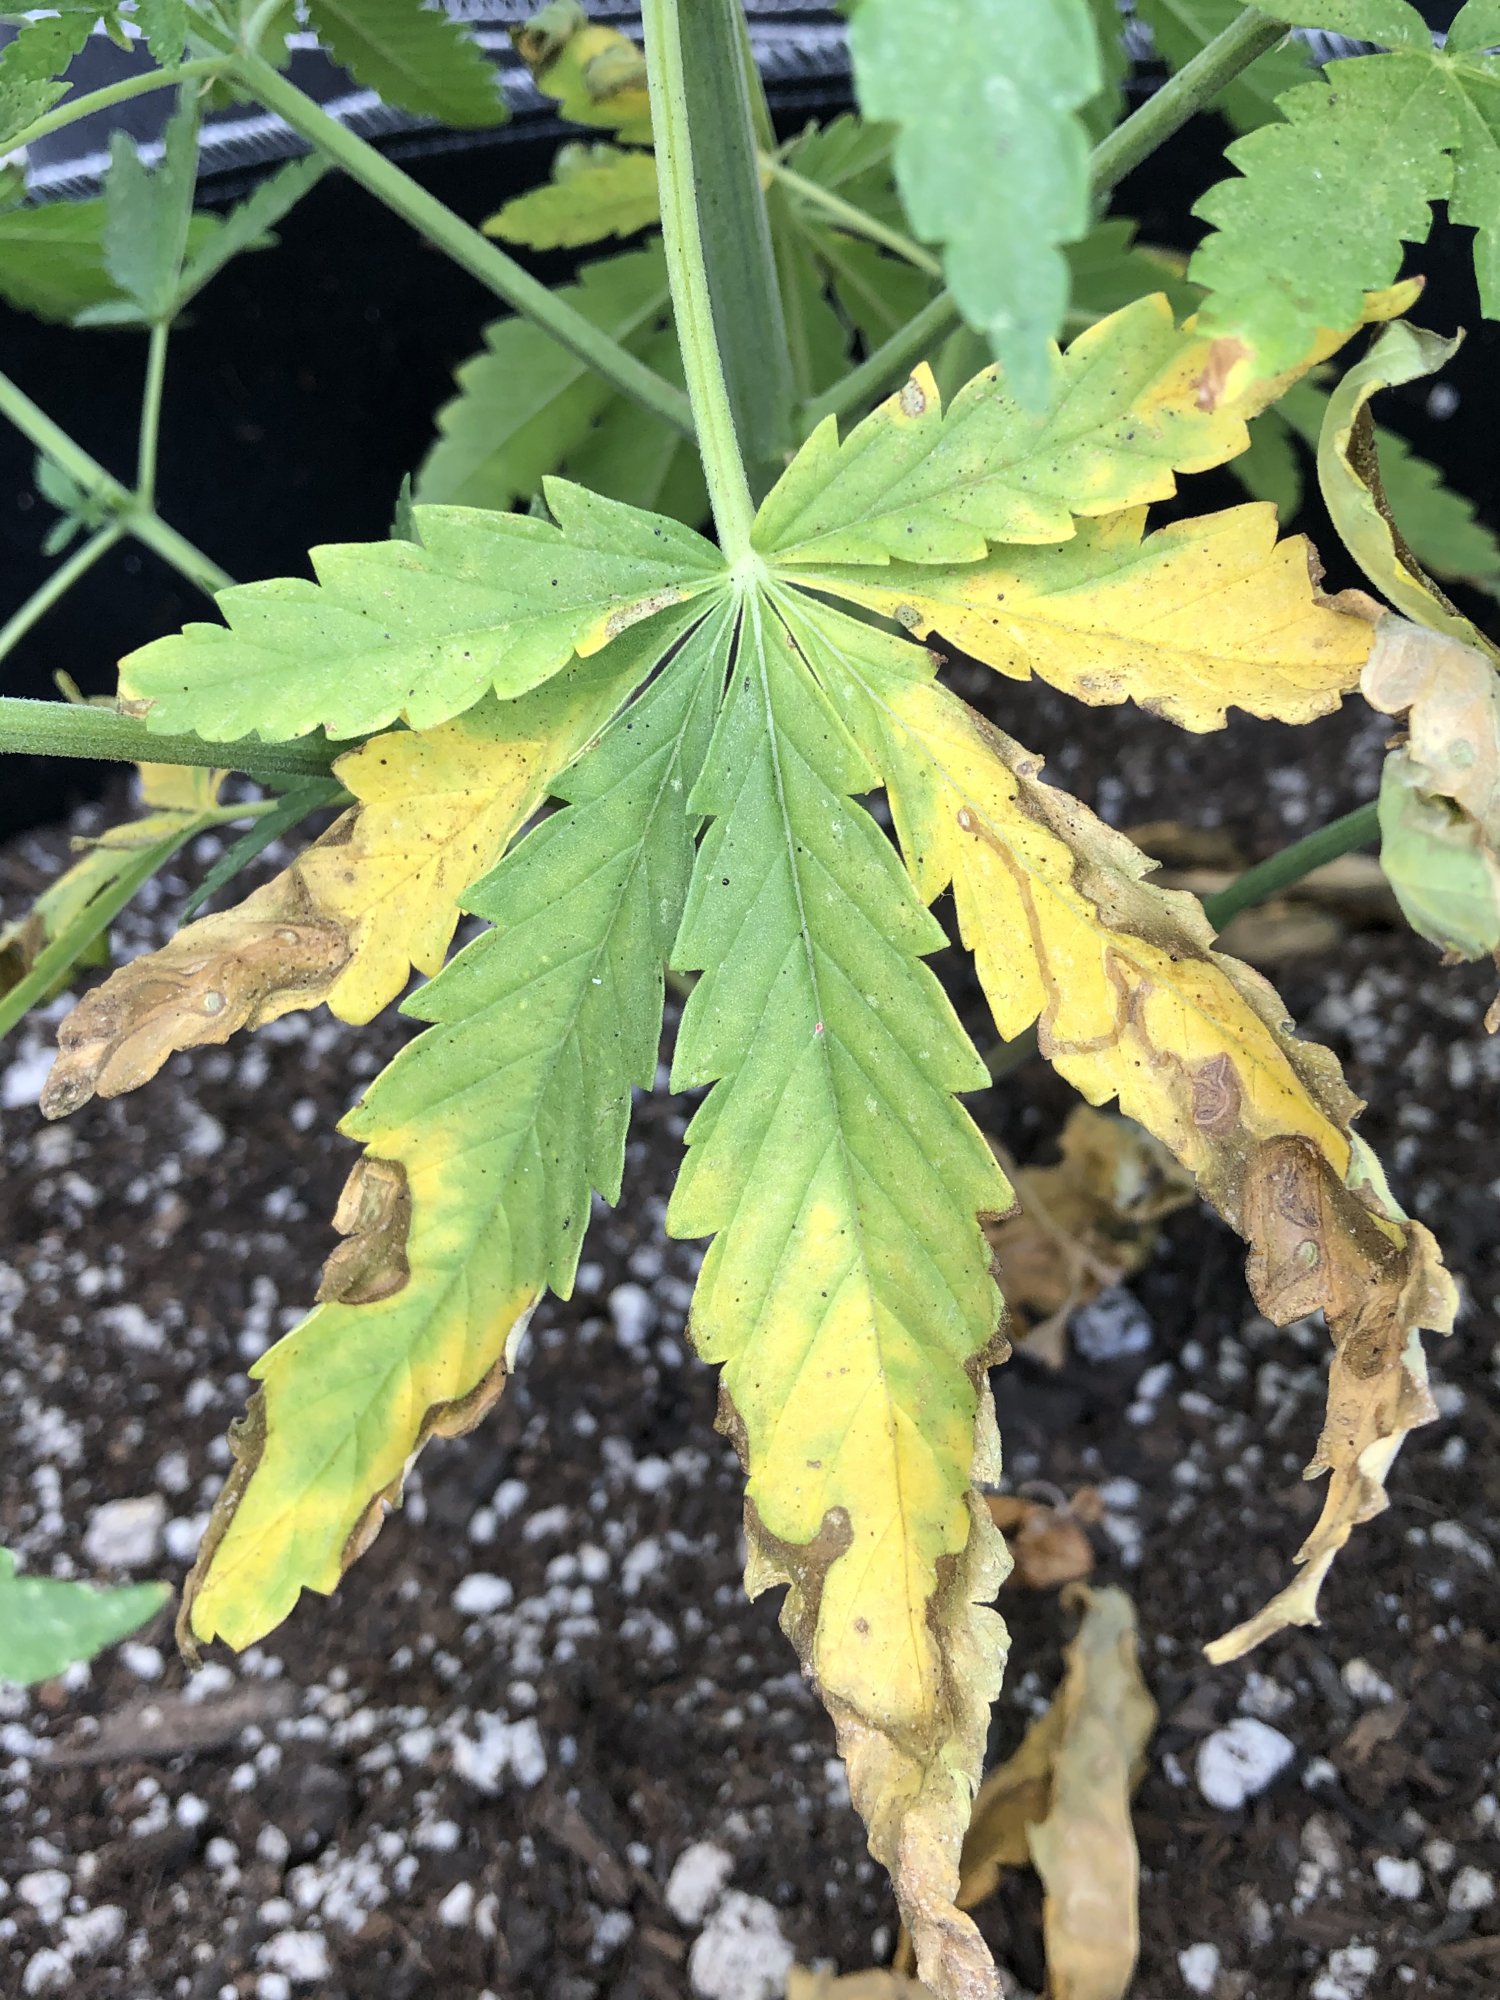 Black spots on leaves and stems please help 3